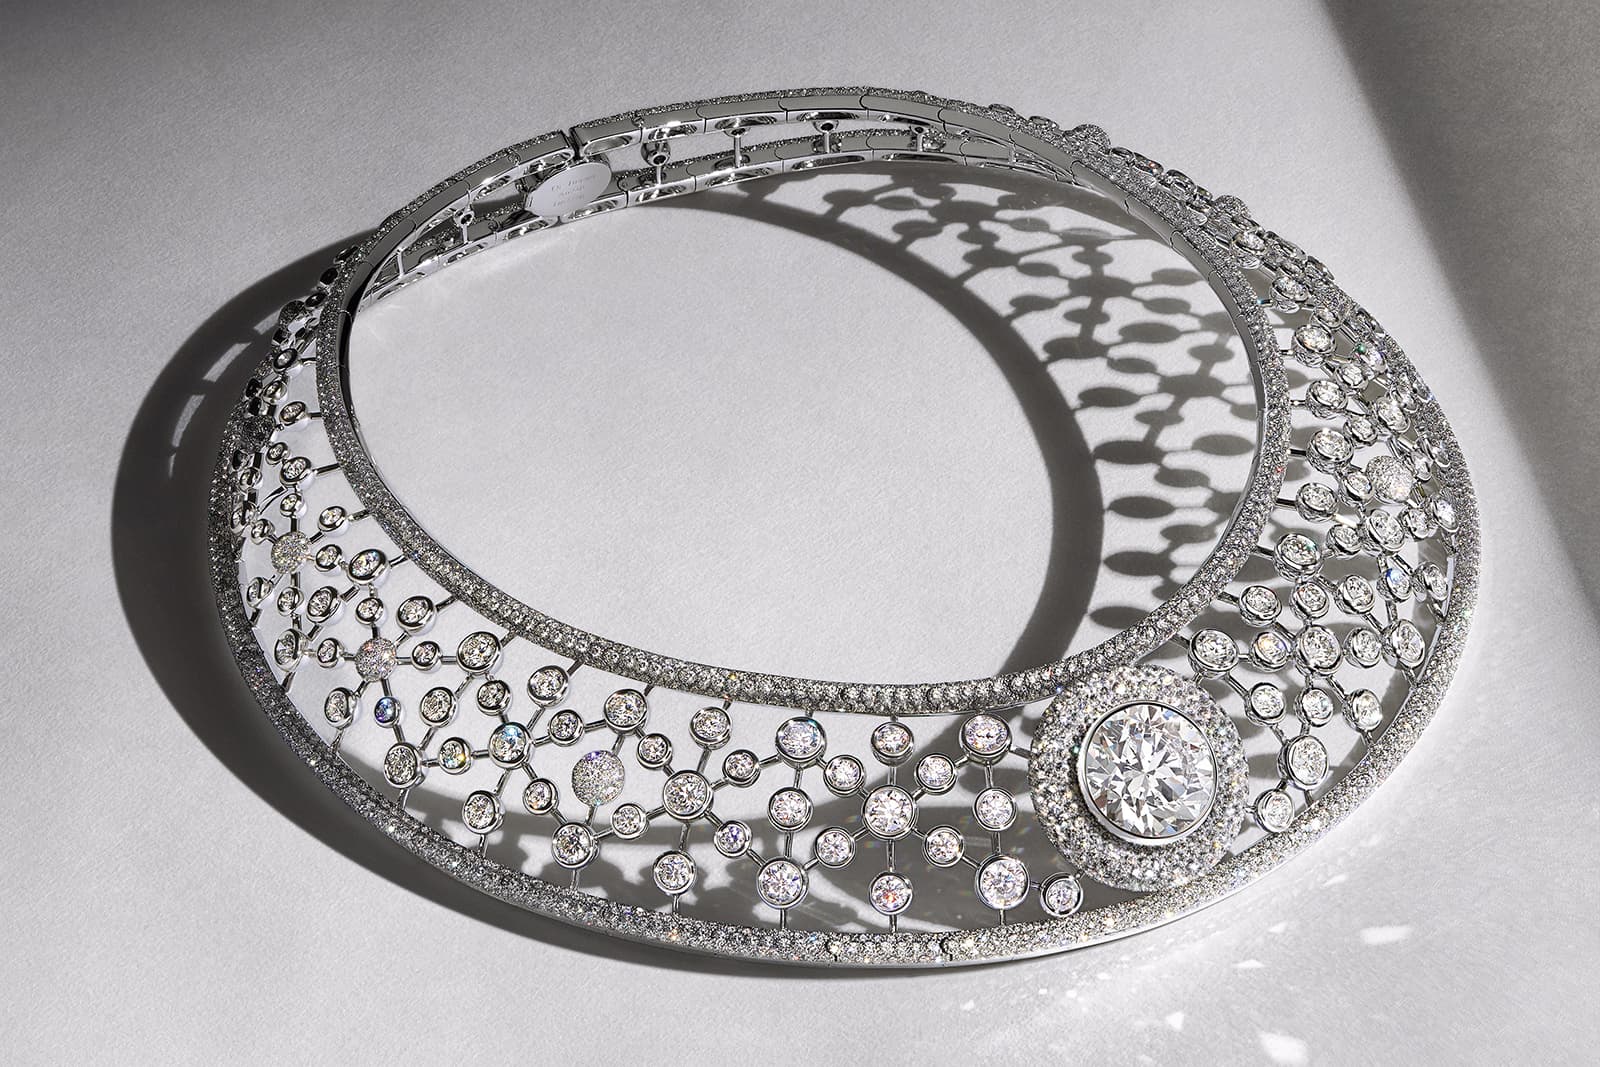 De Beers Jewellers The Alchemist of Light High Jewellery Atomique collar necklace with an 18.57 carat internally flawless diamond at its centre and a further 1,907 diamonds